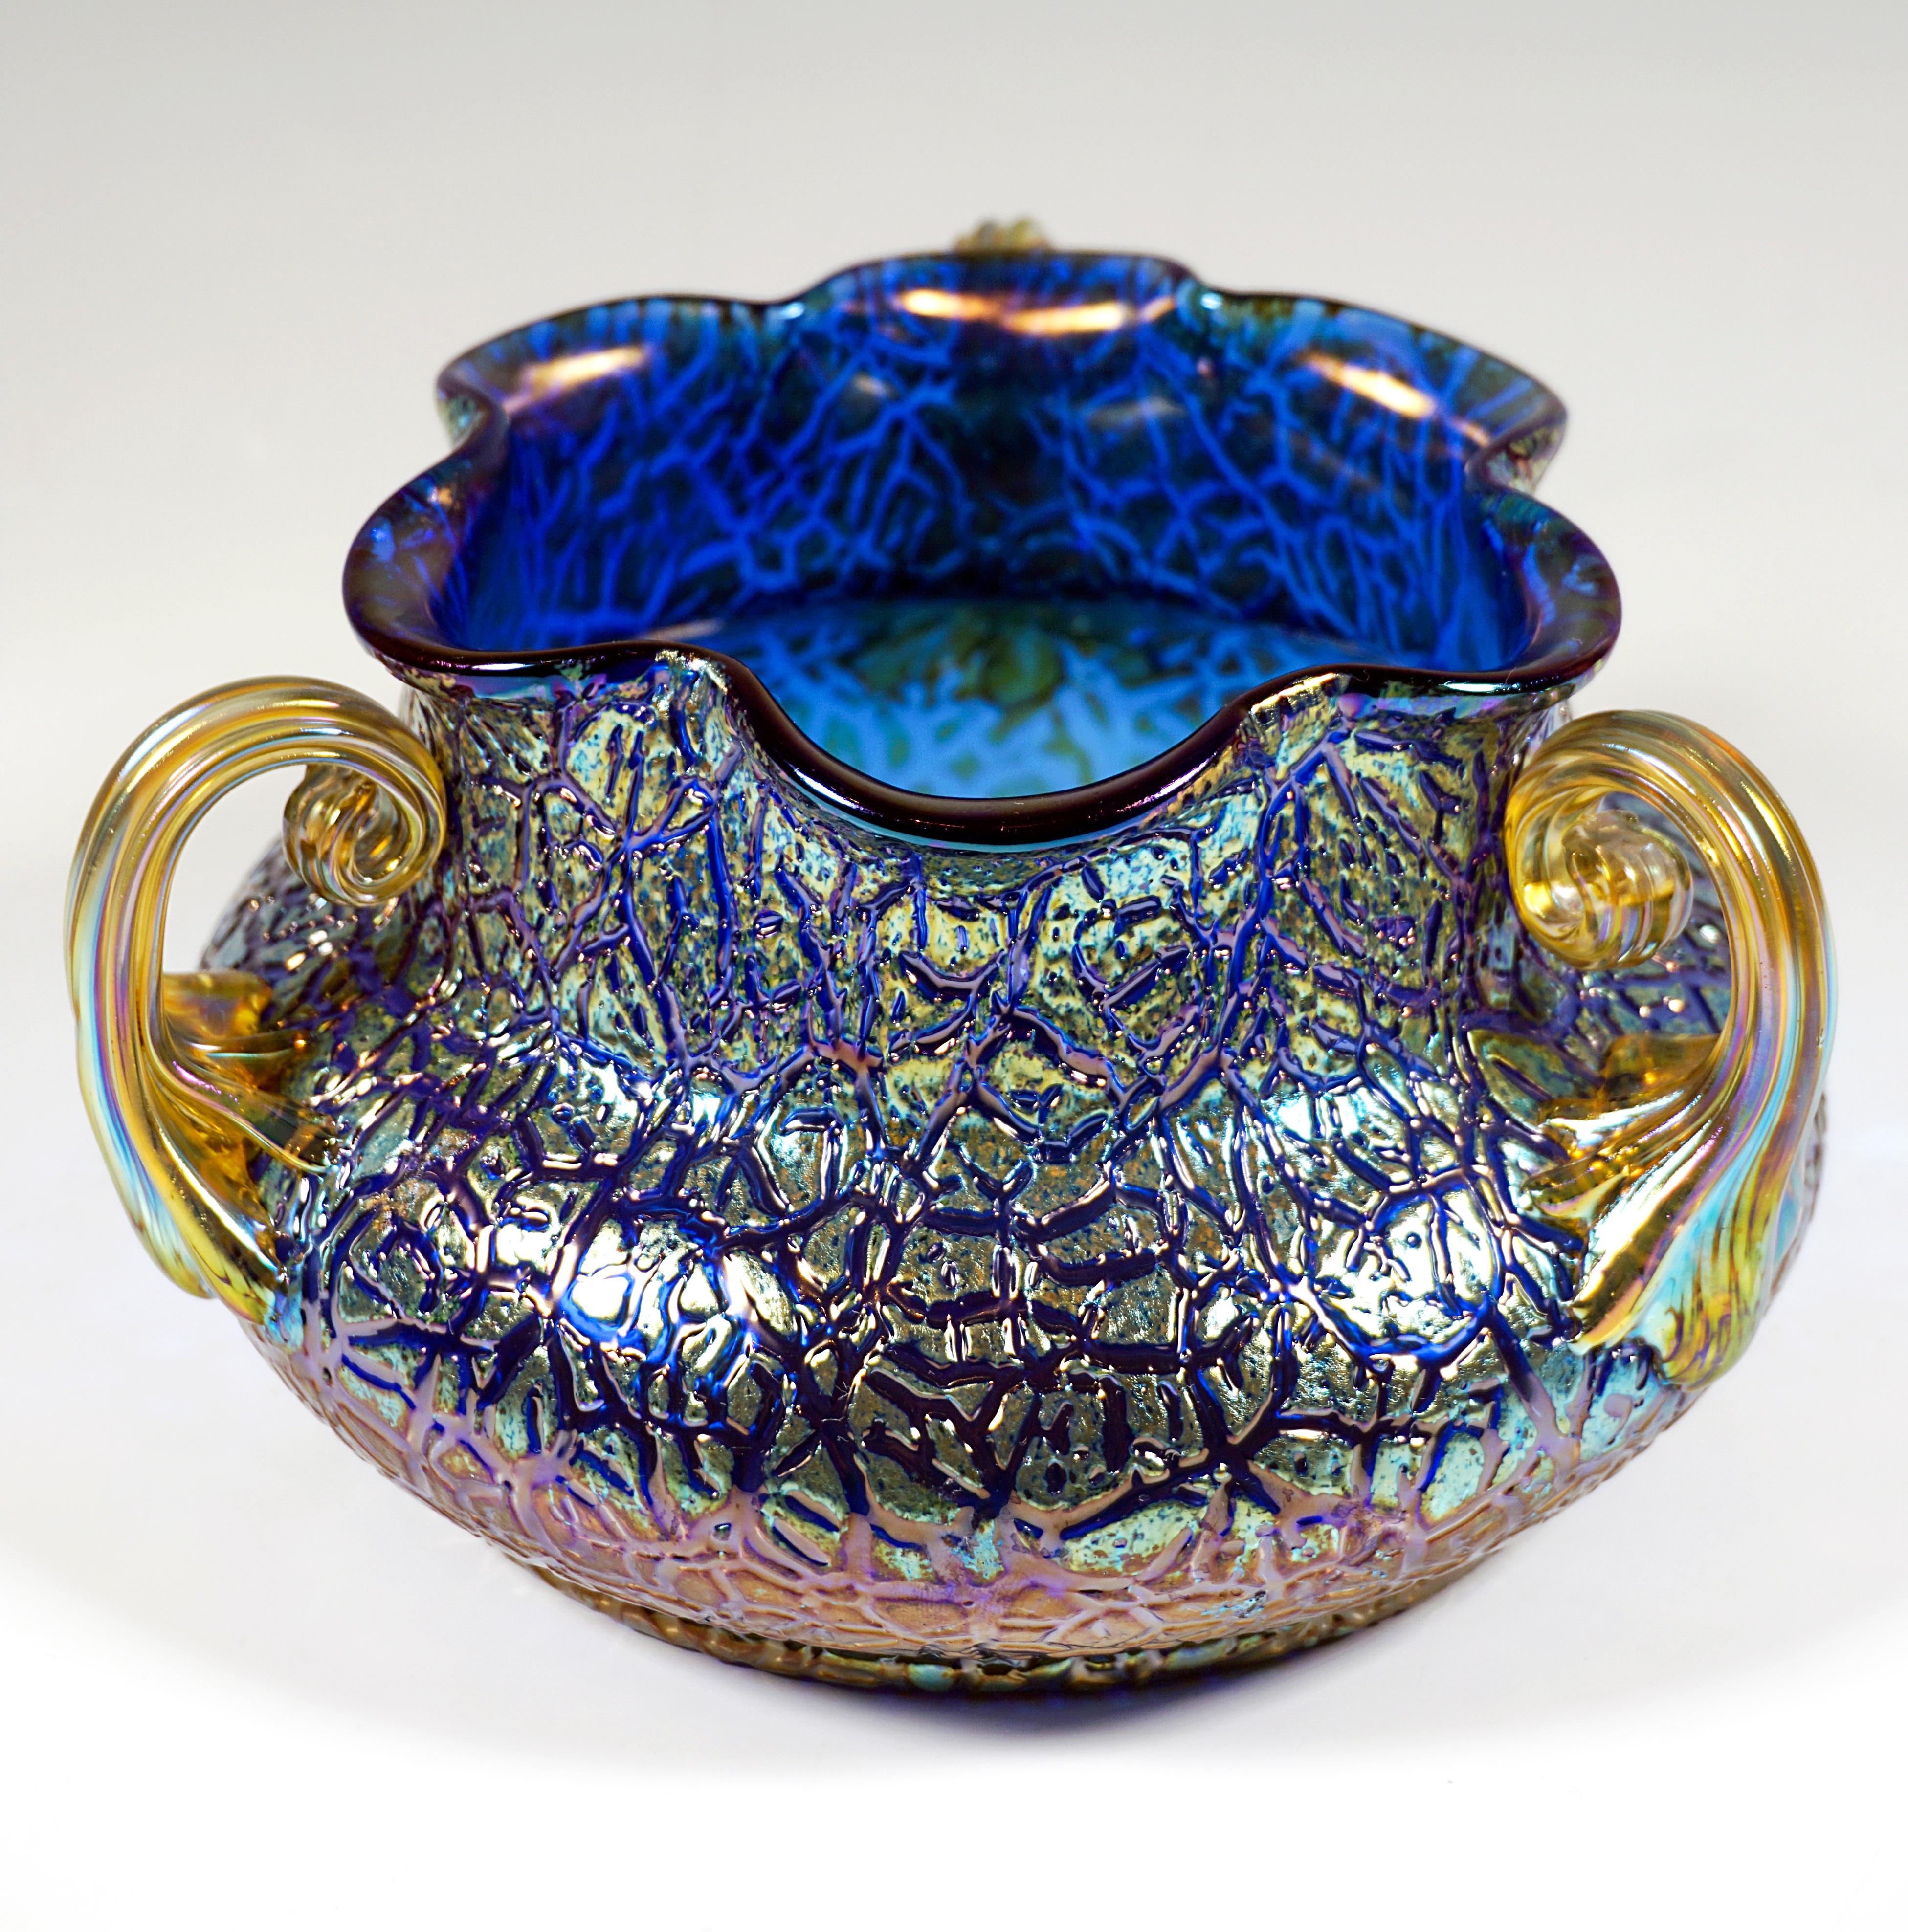 Loetz Art Nouveau Vase Cobalt Mimosa With 3 Handles, Austria-Hungary, circa 1911 In Good Condition For Sale In Vienna, AT